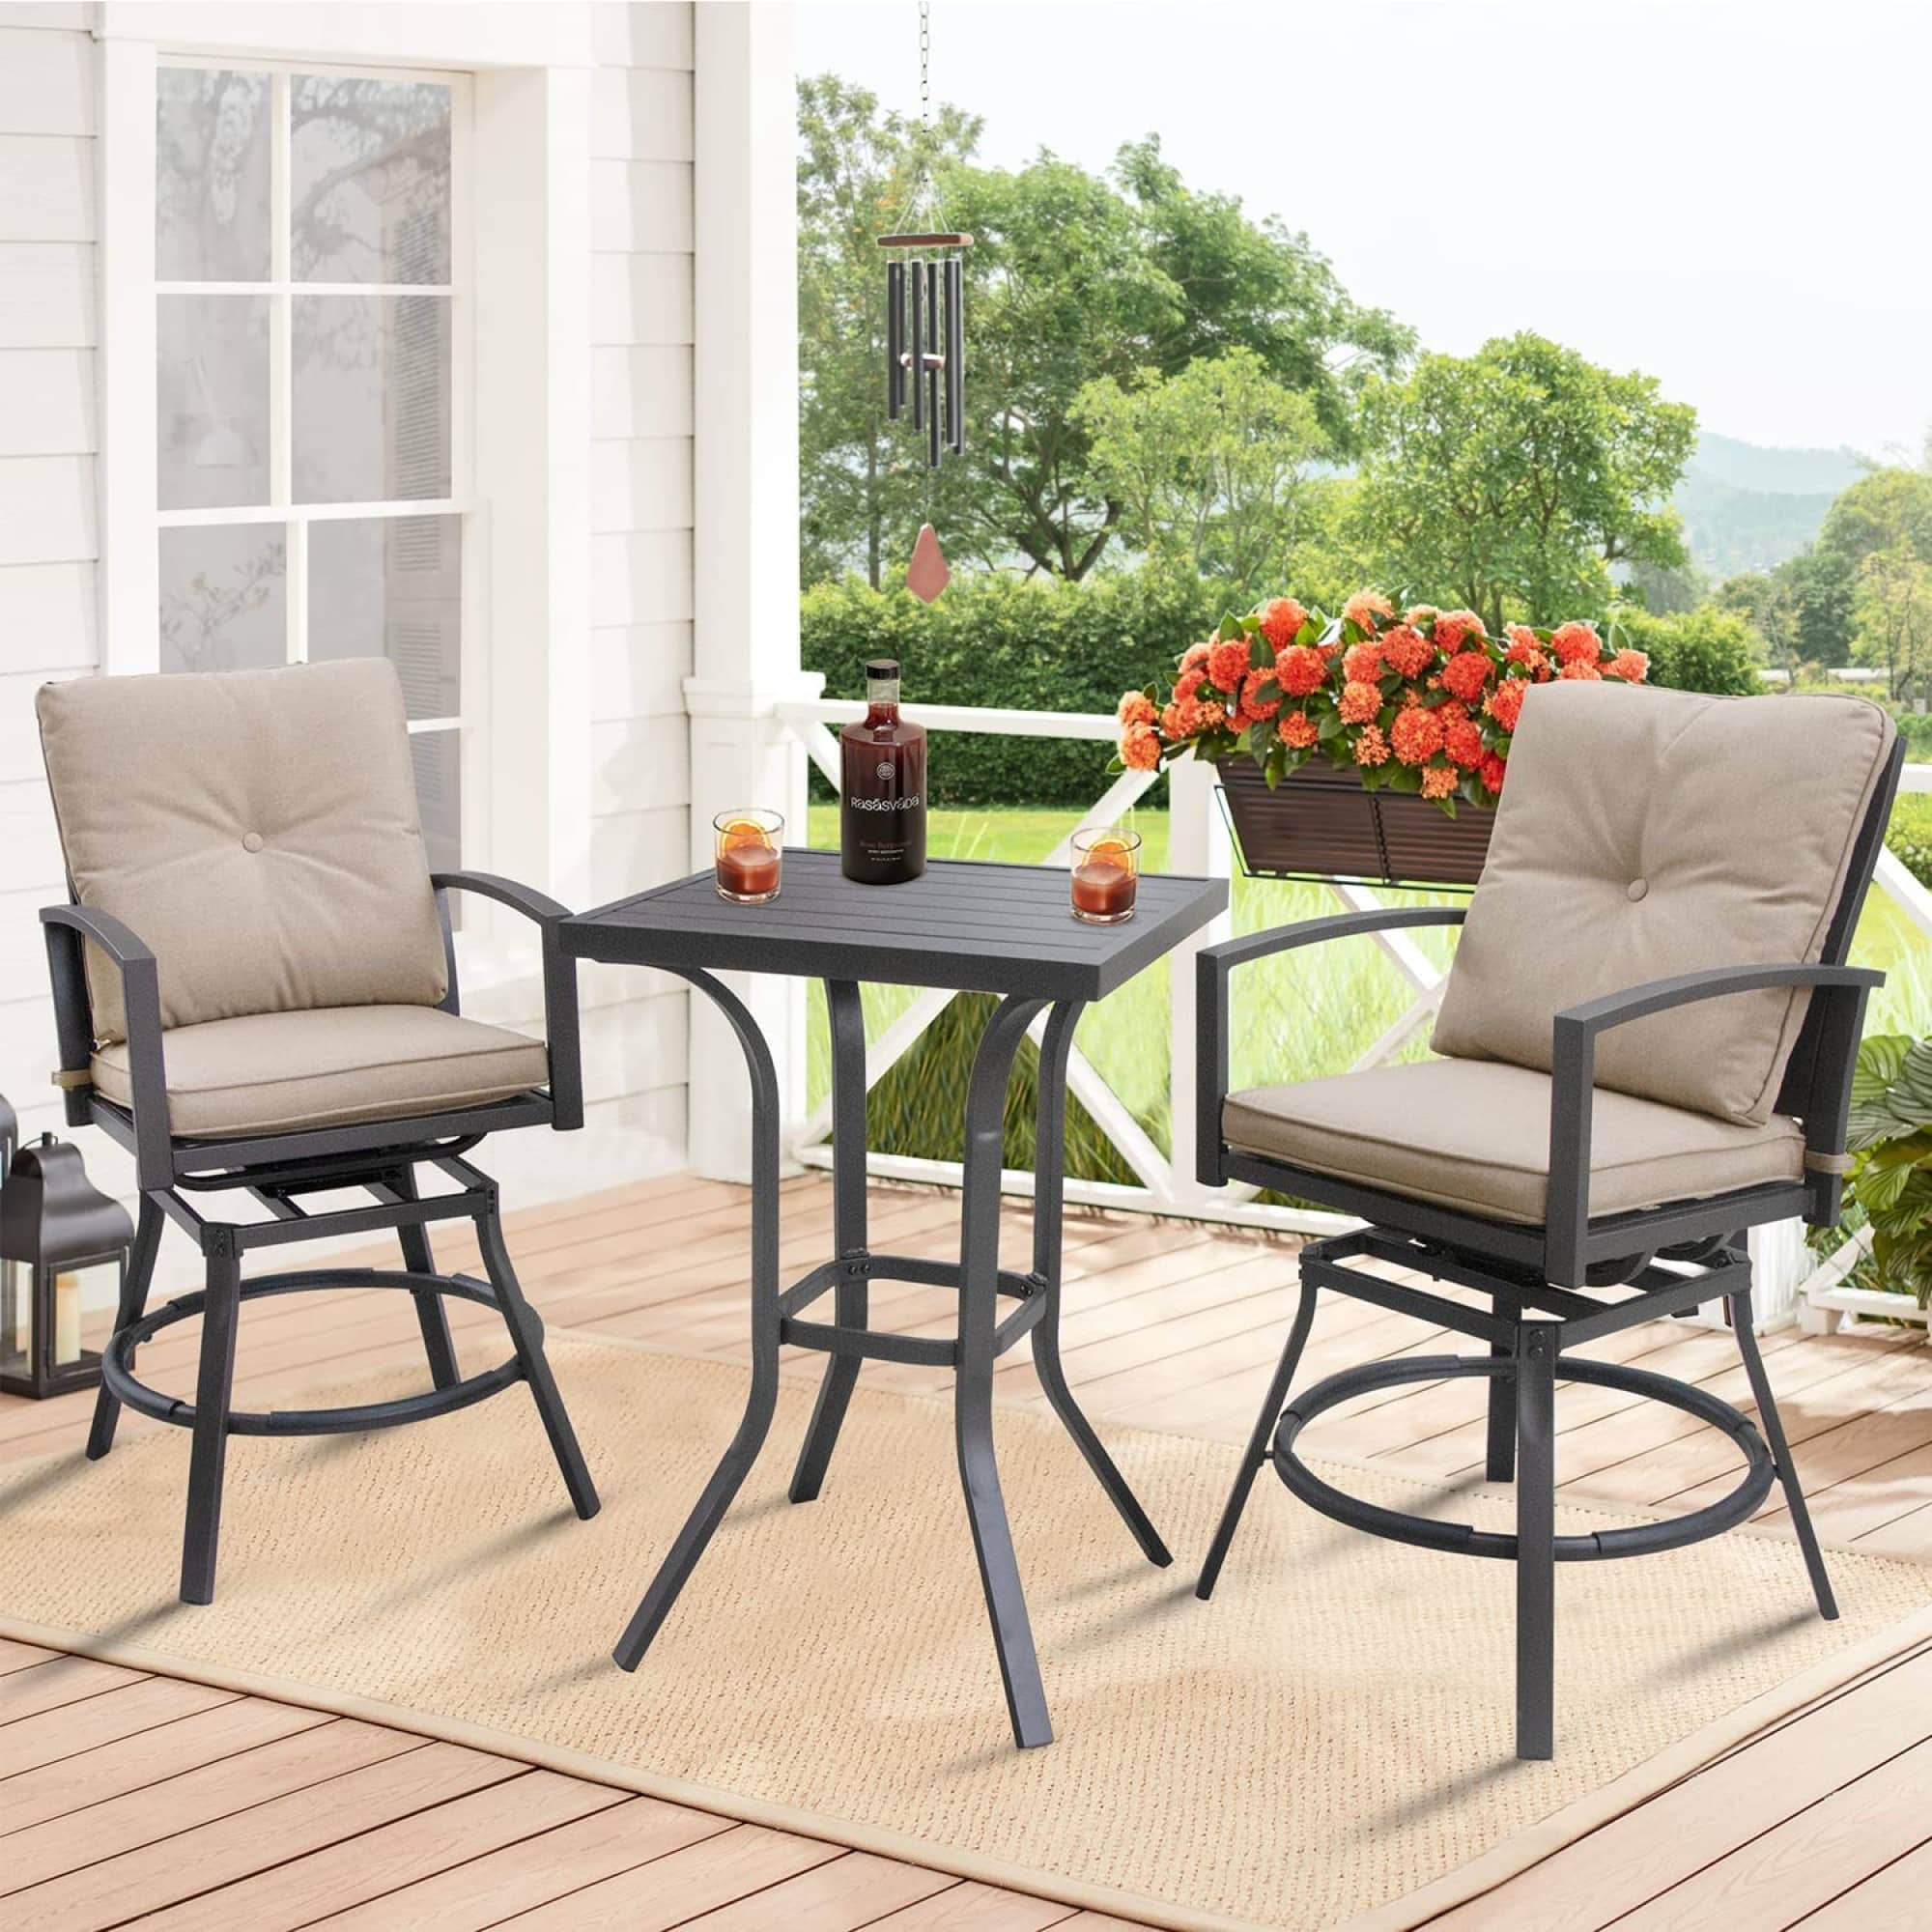 CASAINC 3 Piece Outdoor Patio All-Weather Metal Bar Height Bistro Set With 2 Swivel Cushioned Bar Stools